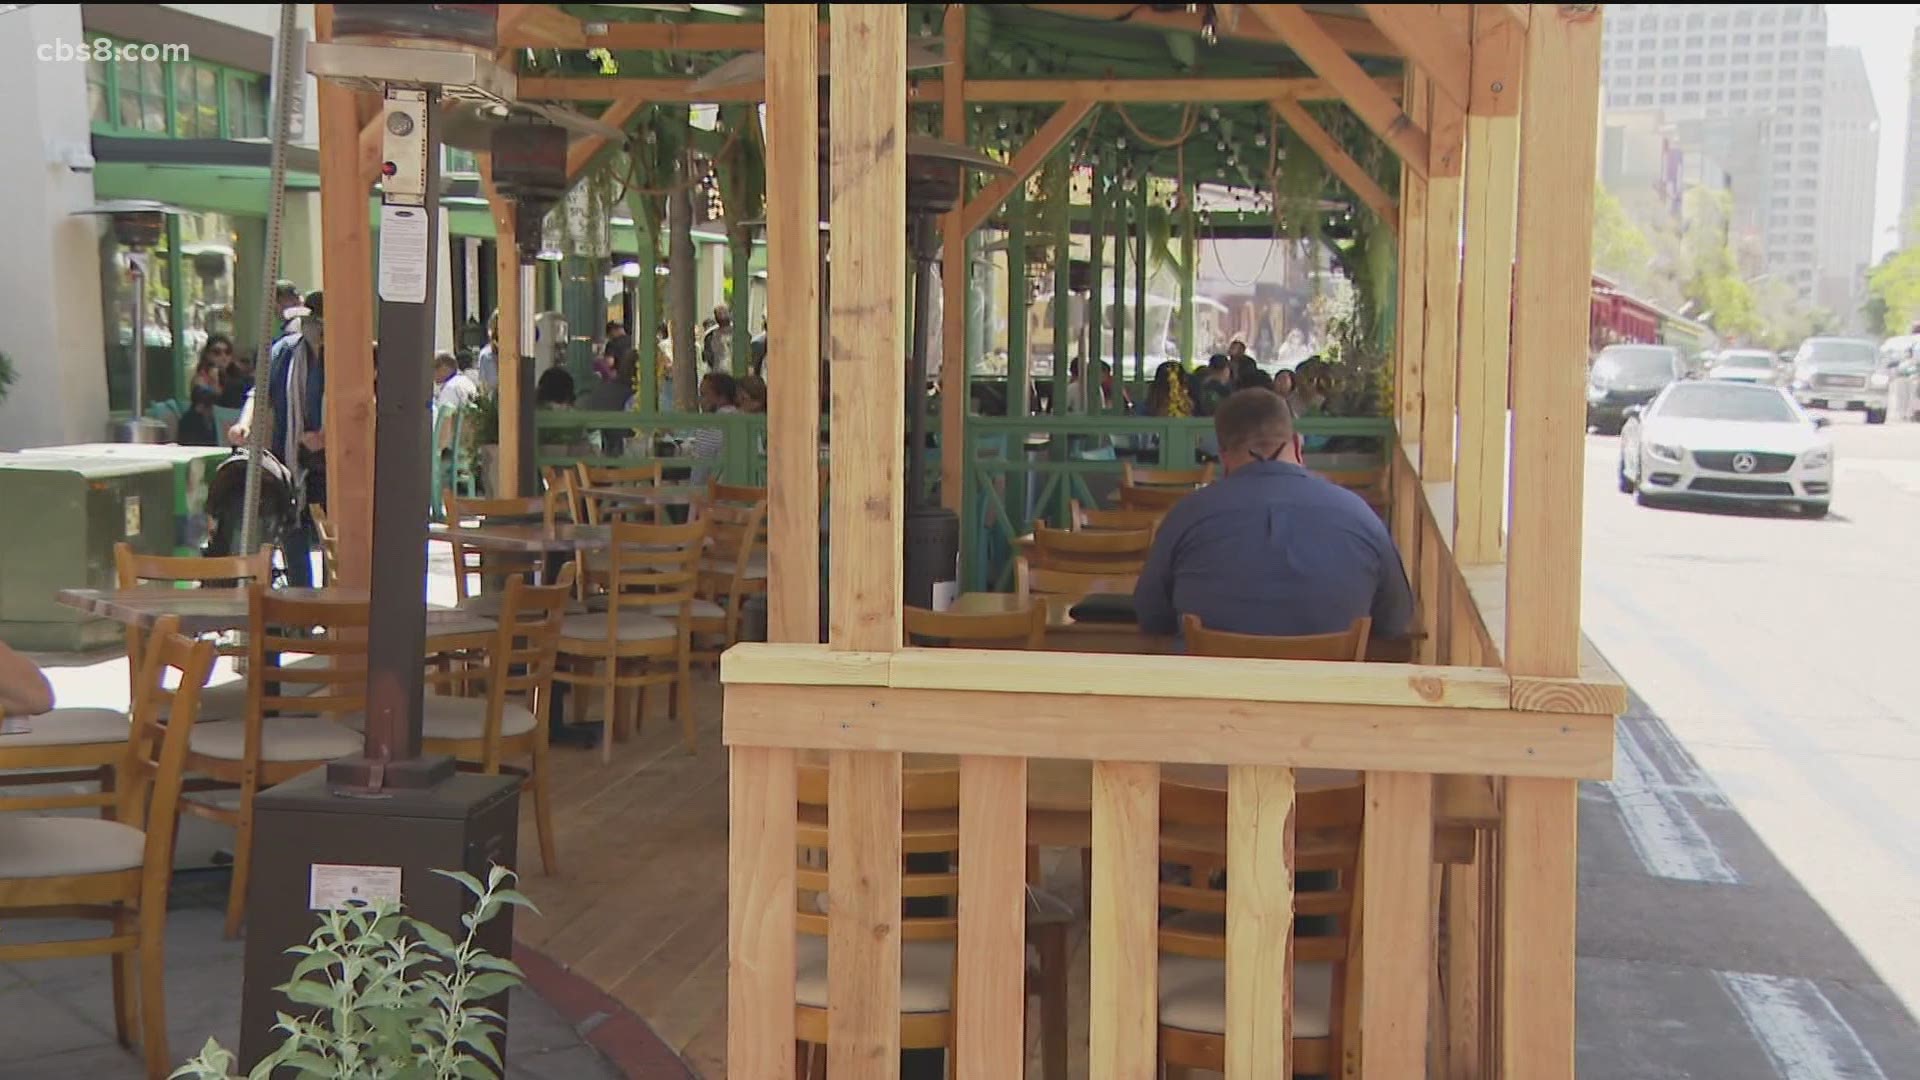 Outdoor dining became necessary during the pandemic. Some owners in San Diego want to make their temporary structures permanent to recoup lost revenue.